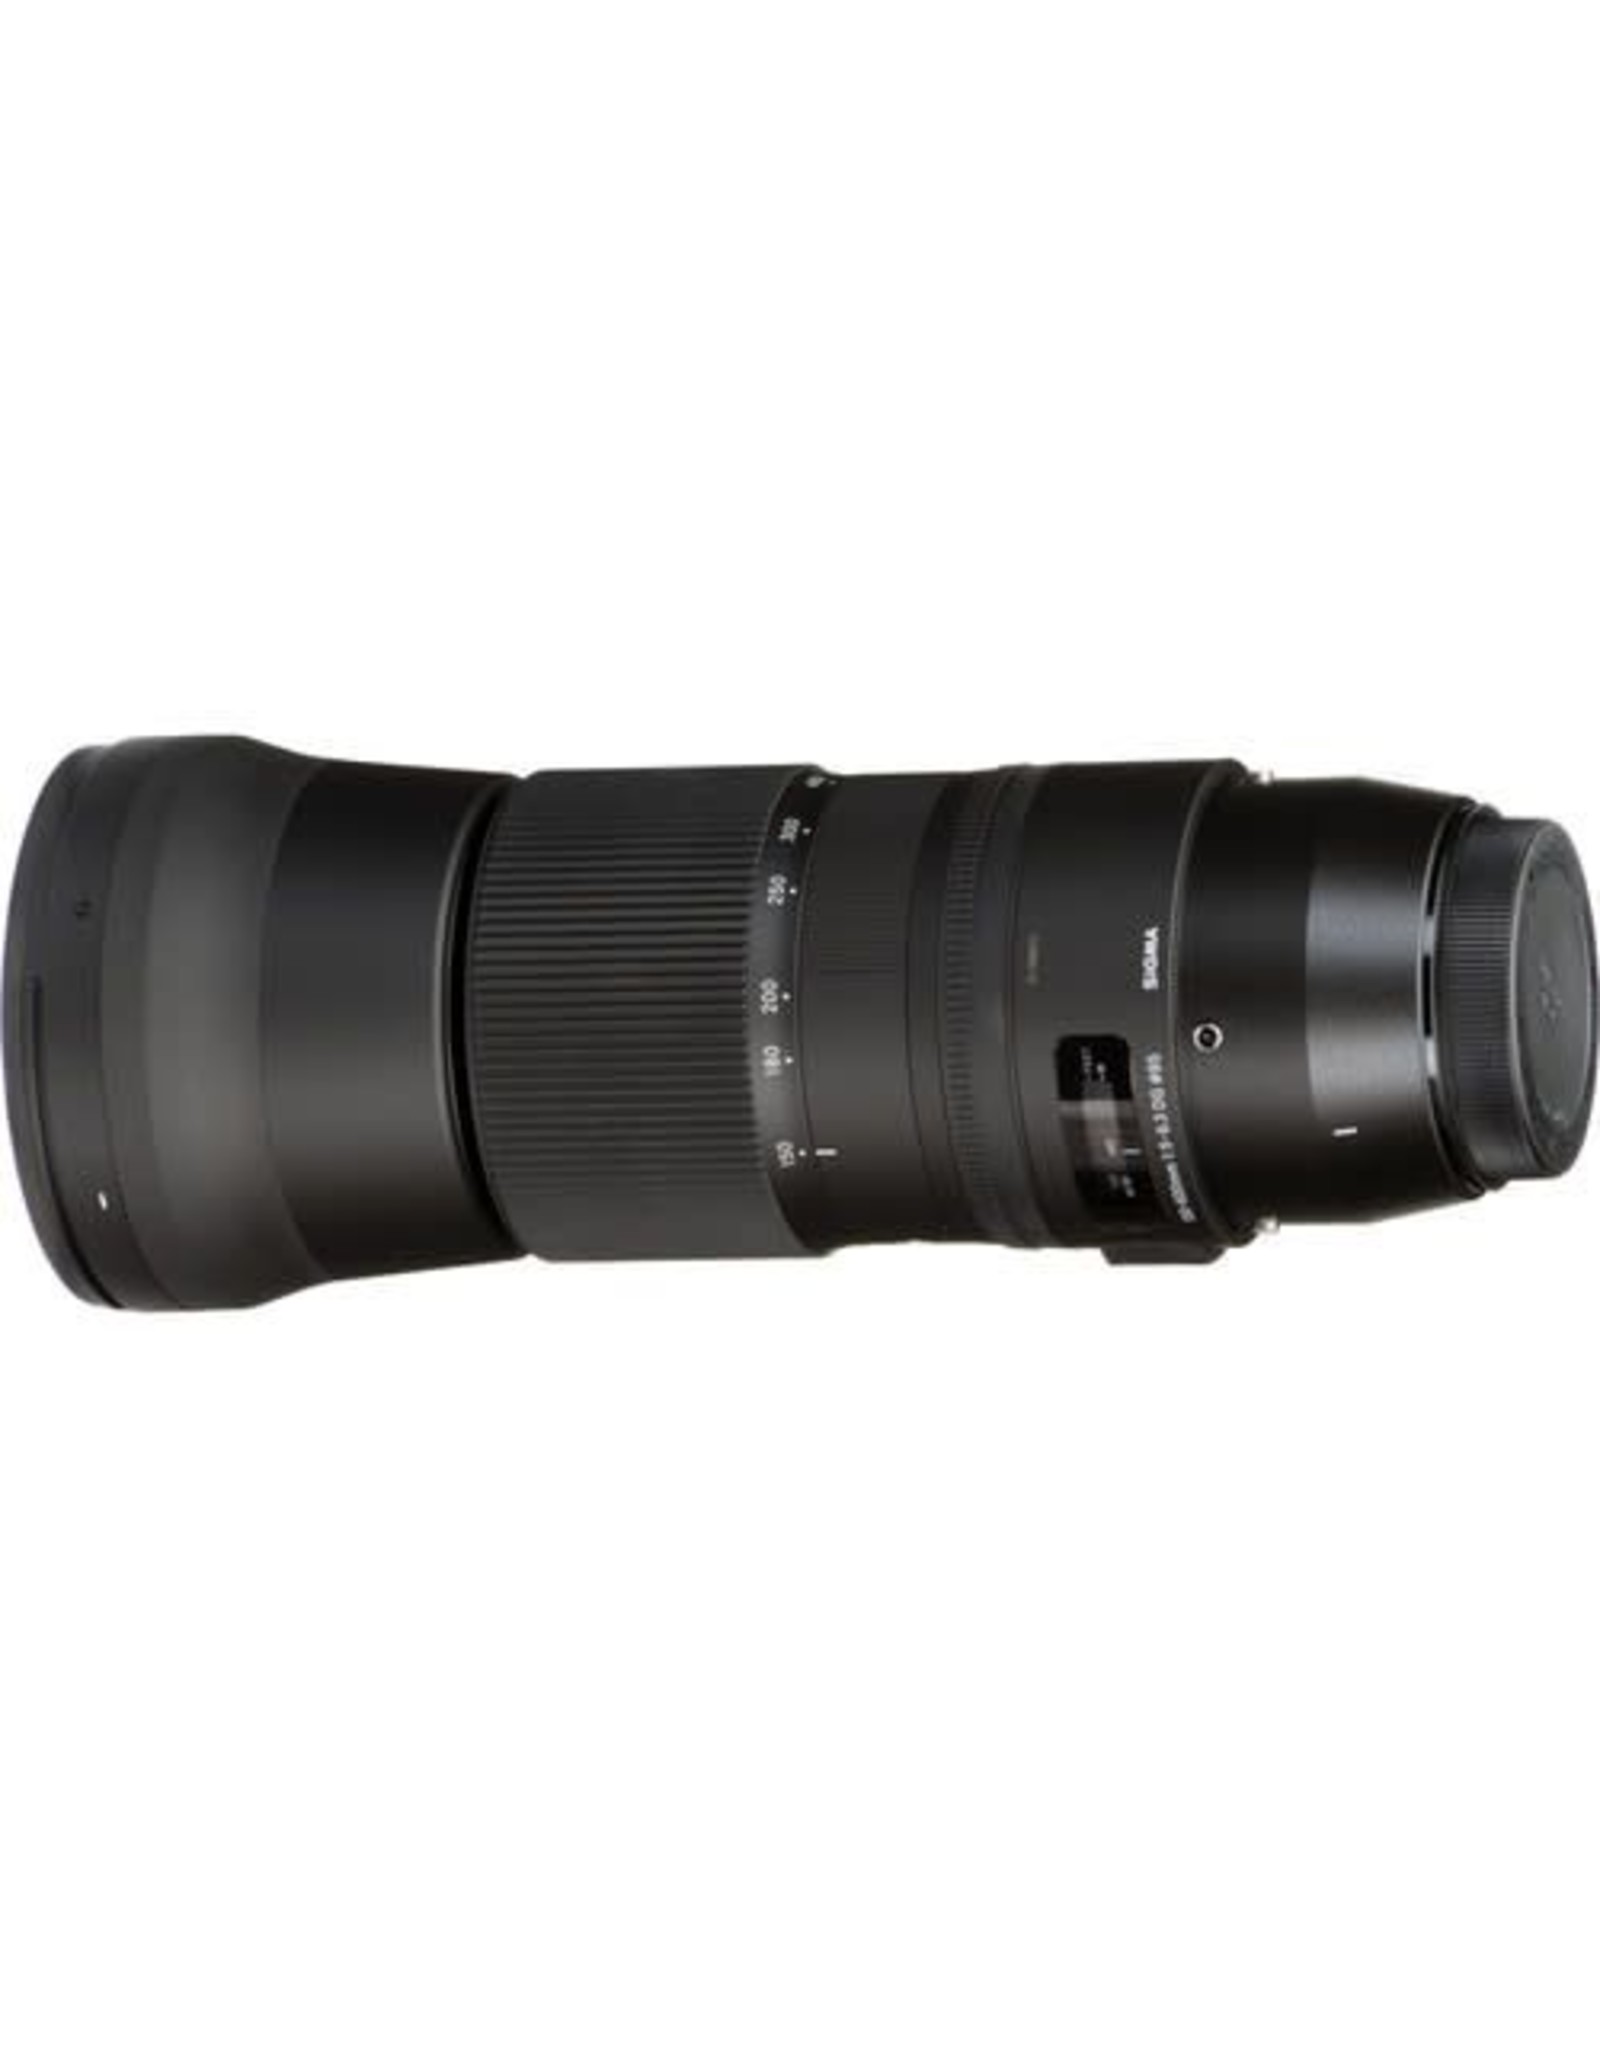 Sigma Sigma 150-600mm 5-6.3 Contemporary DG OS HSM (Specify Mount Type)